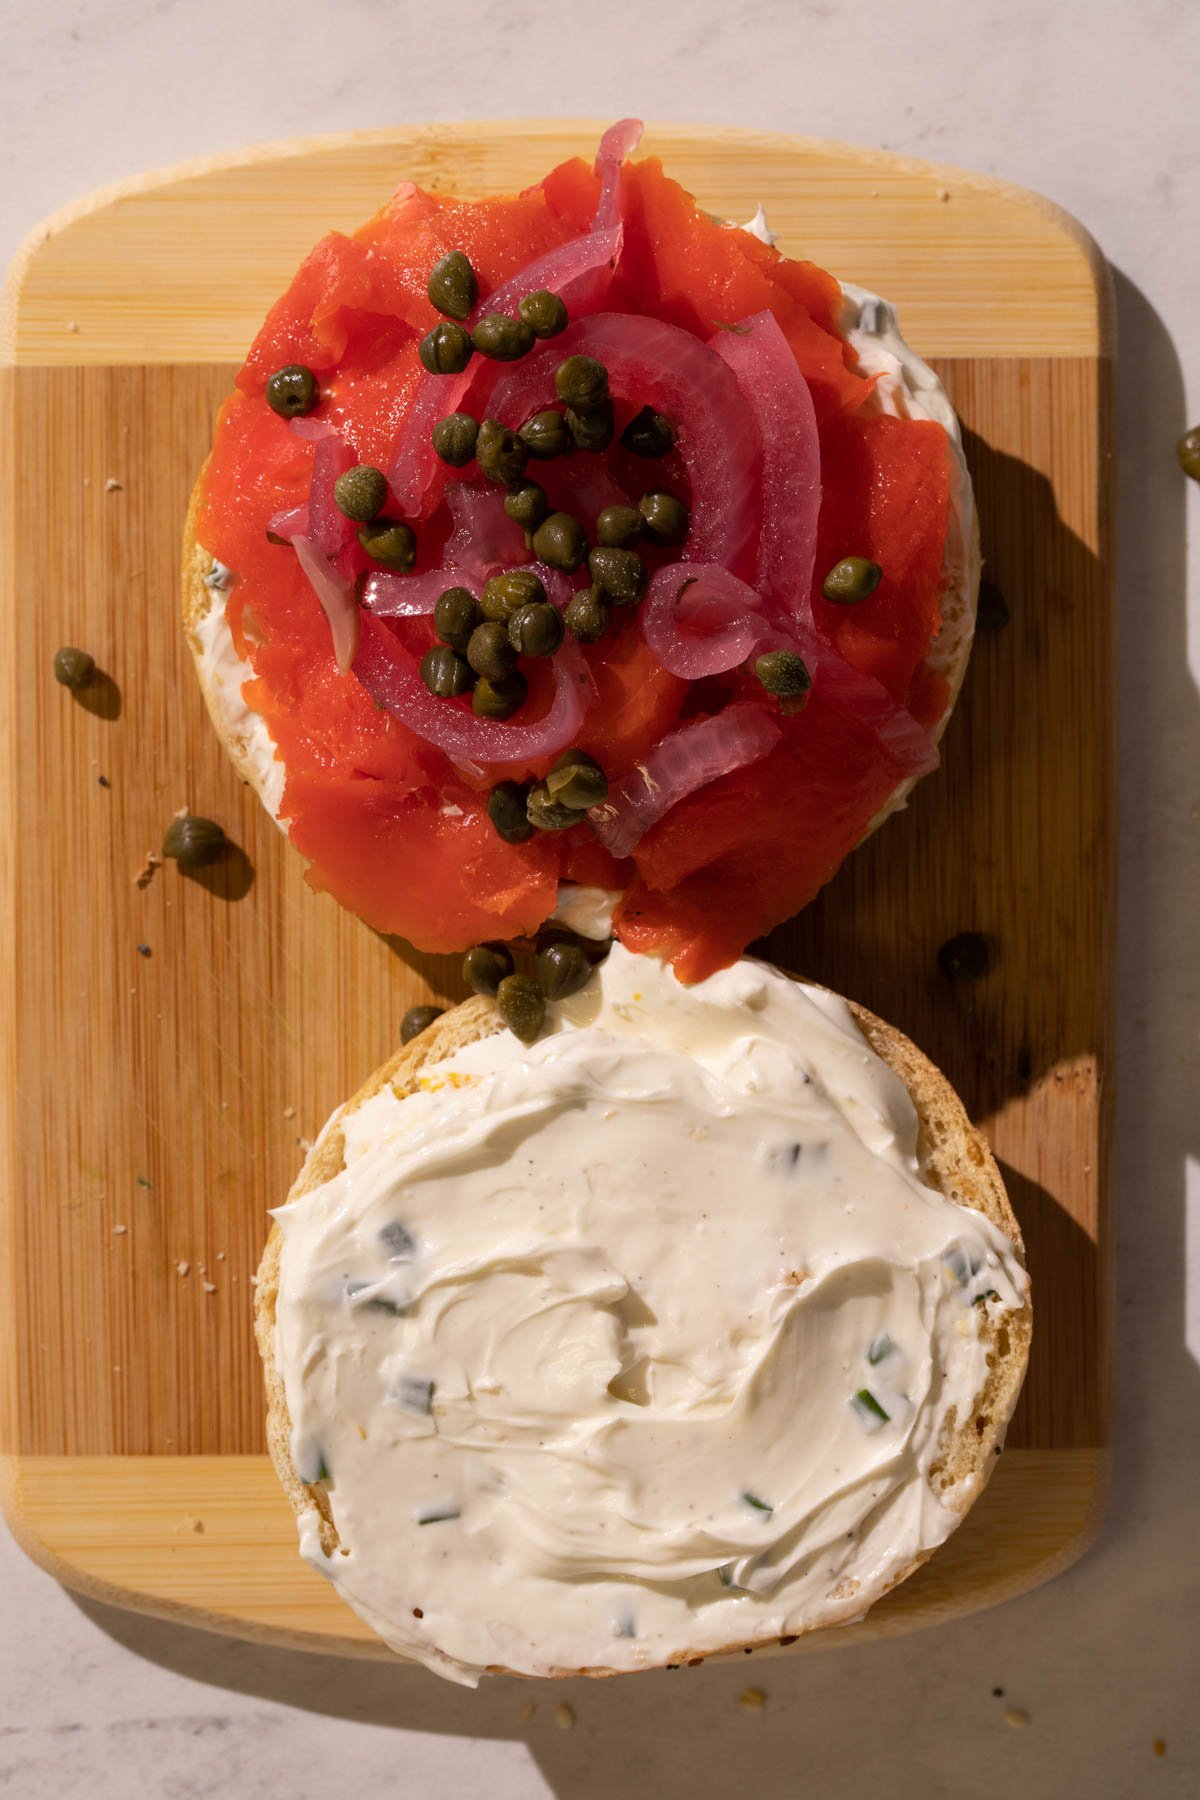 A toasted everything bagel cut in half, covered with cream cheese with chives and fresh lemon, and one half of the bagel, smoked salmon is layered and topped with pickled red onion and capers.